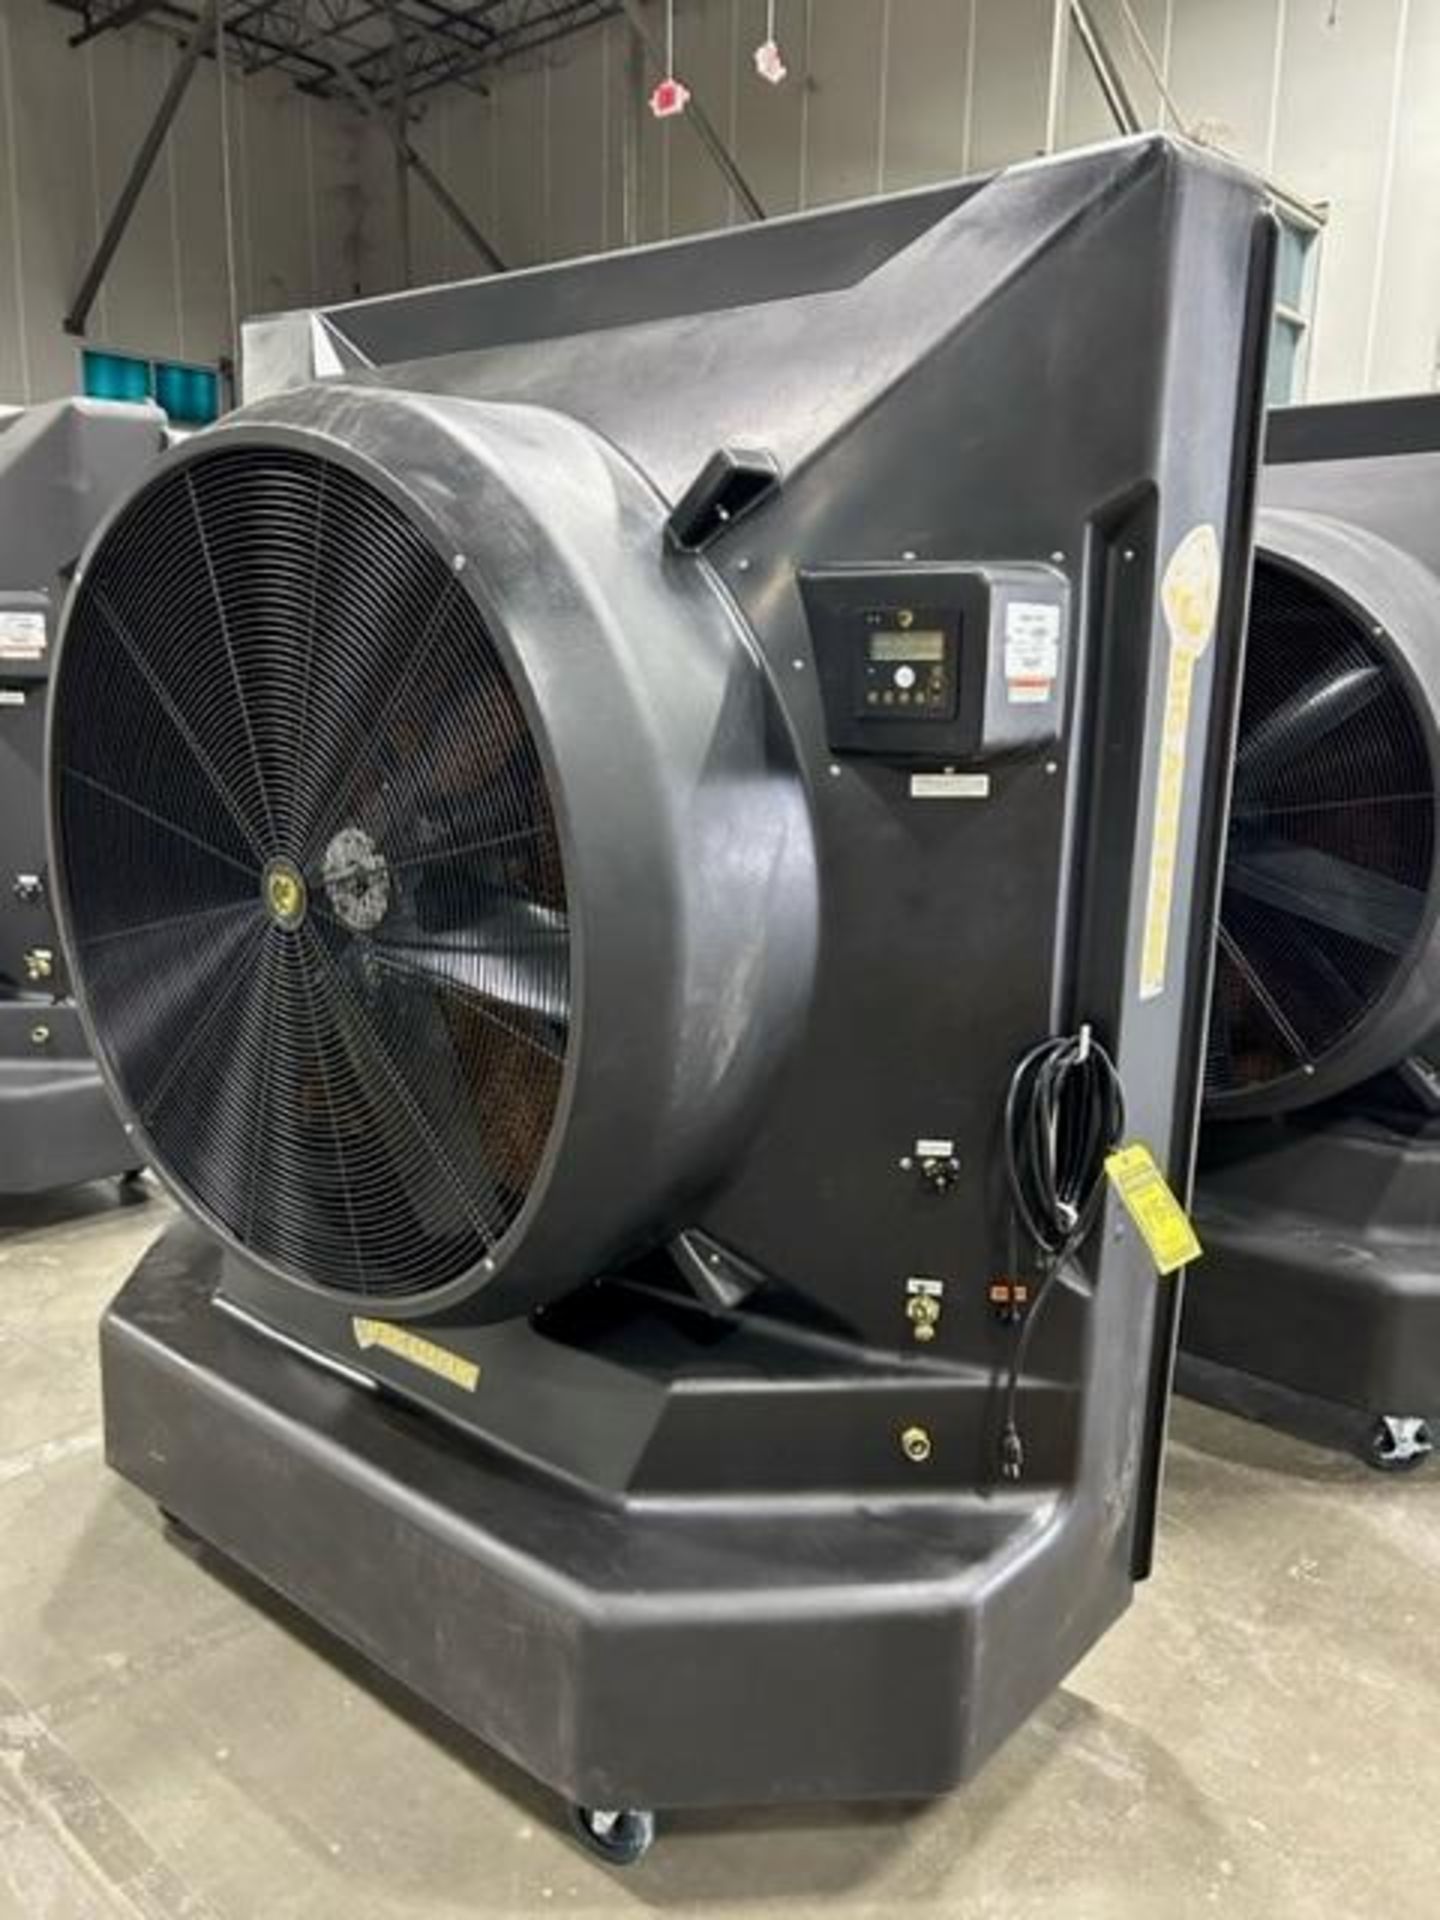 2023 Big Ass Fans Portable Evaporator Cooler, Model: Cool-Space 500, 120-Volts, 1500 Watts ($50 Load - Image 2 of 4